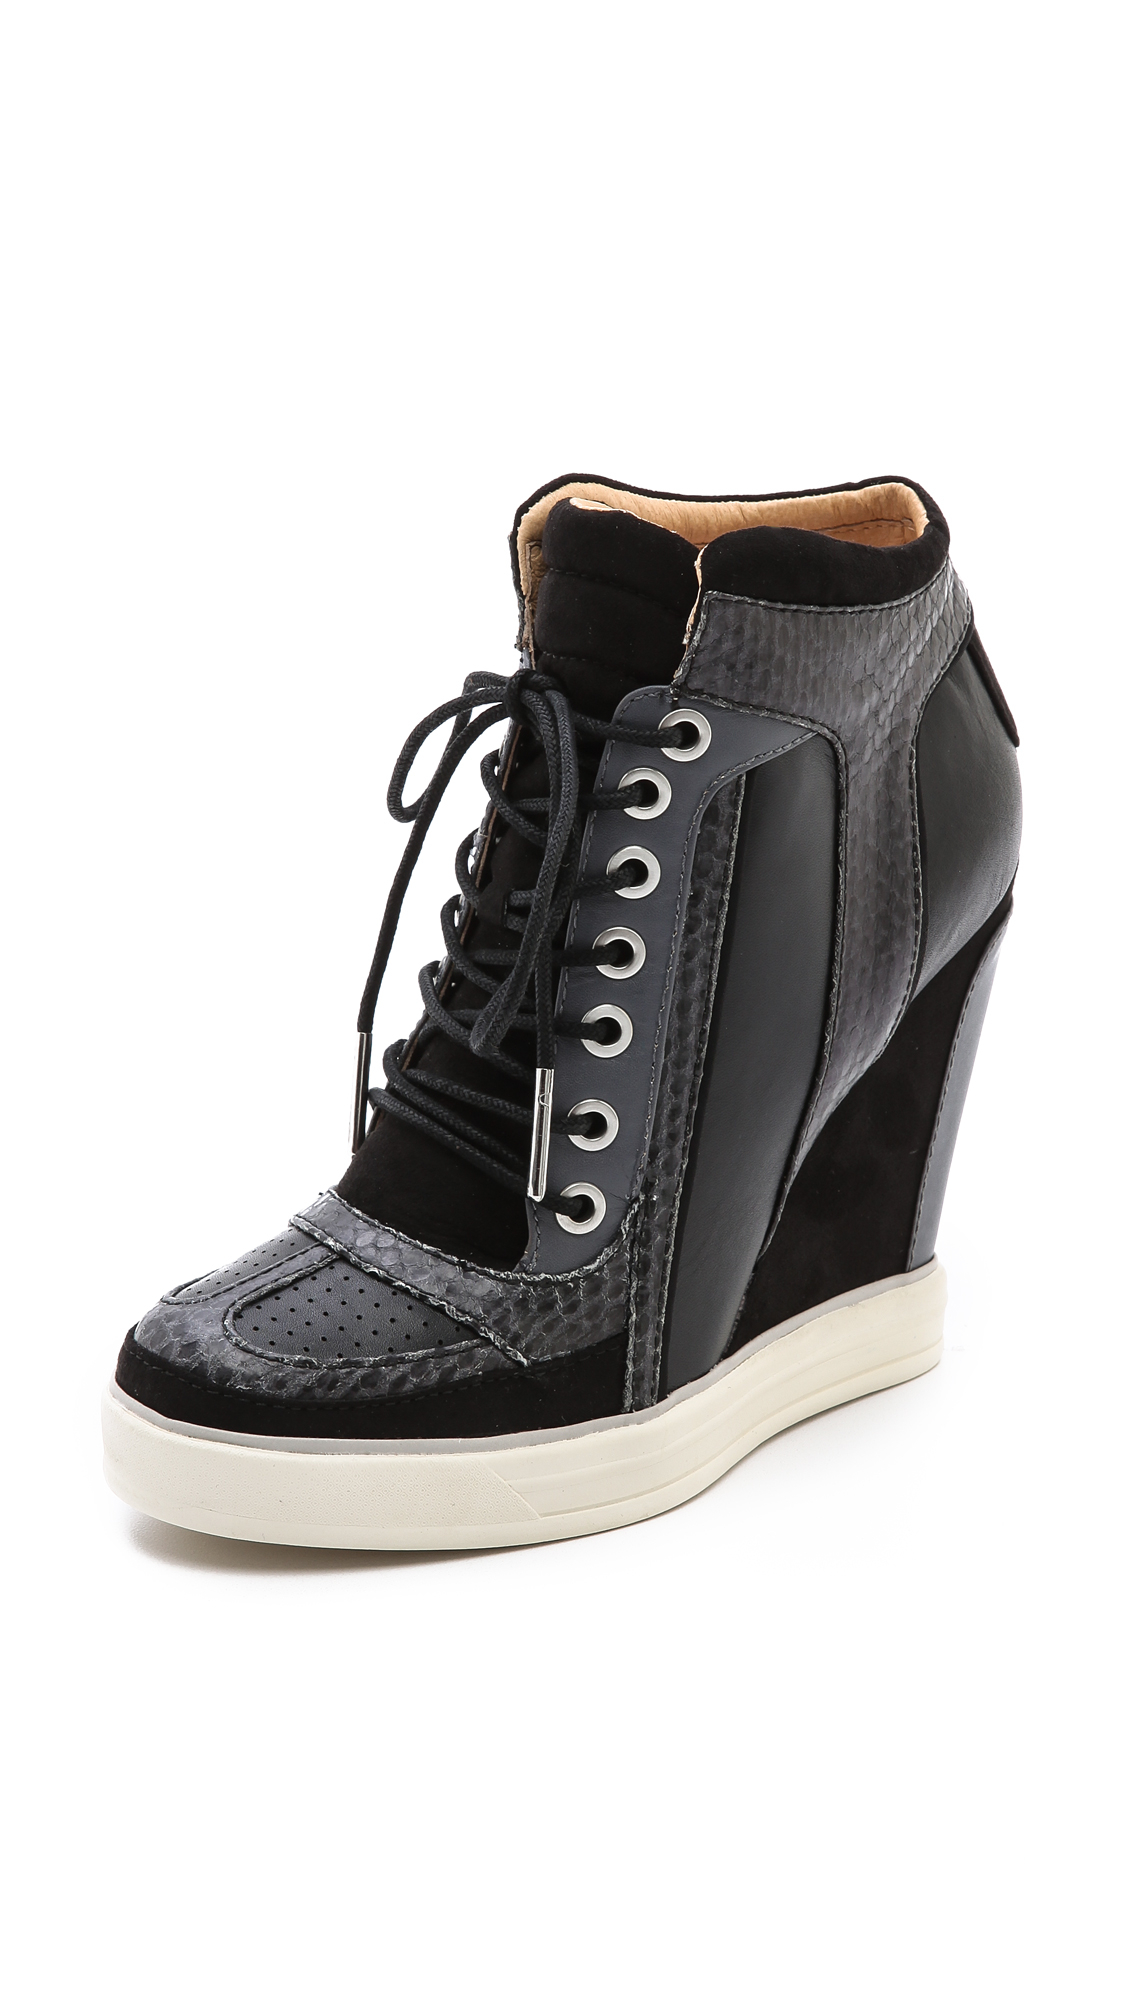 L.A.M.B. Summer Lace Up Wedge Sneakers in Black - Lyst